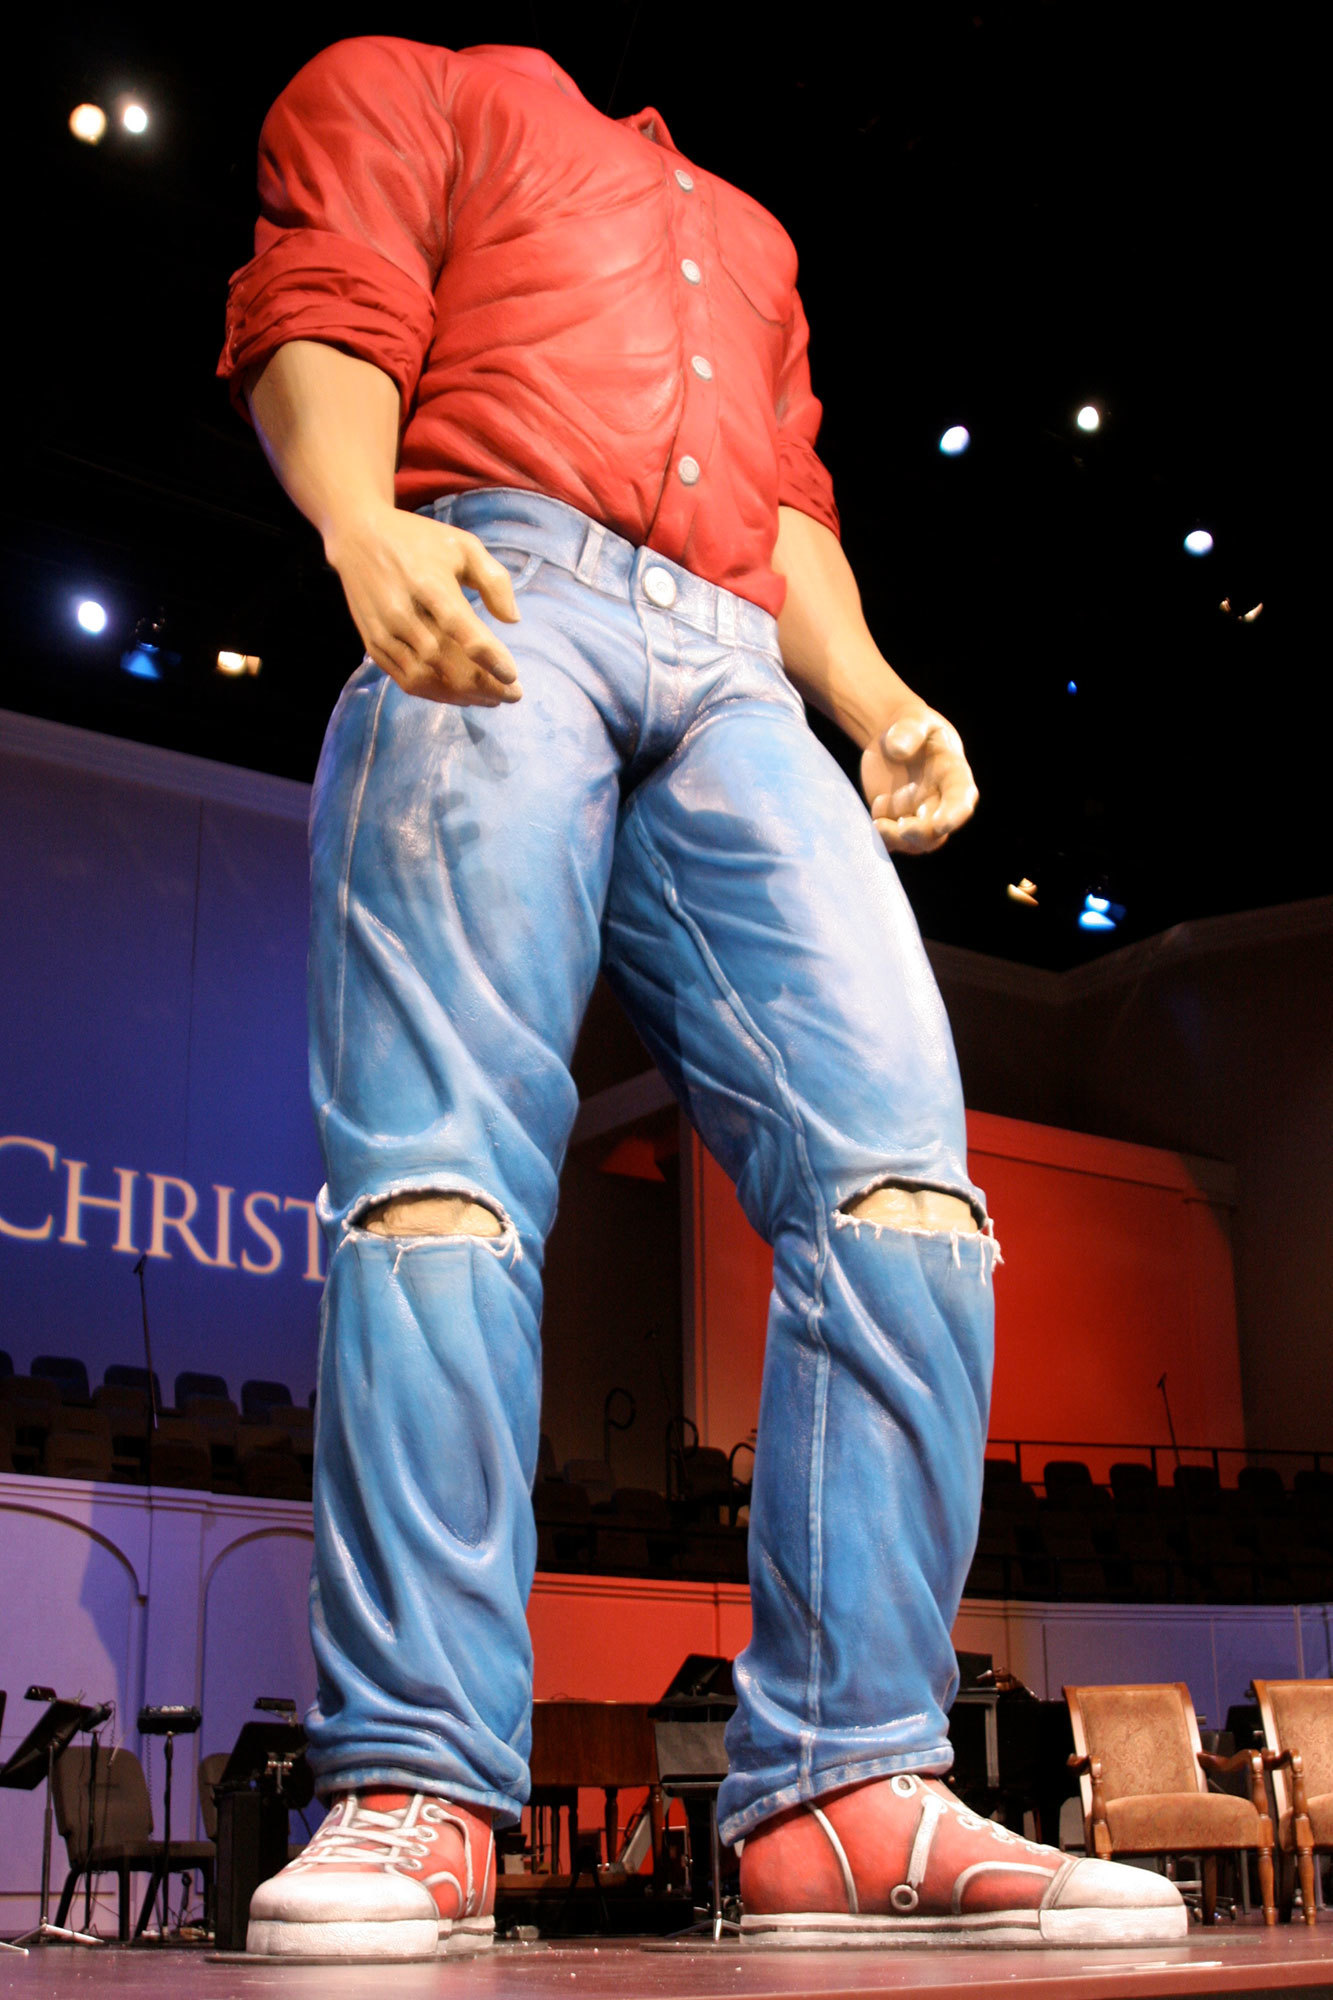 Giant 40 foot tall sculpted 3D Man with a red shirt and blue jeans for a Church sermon series